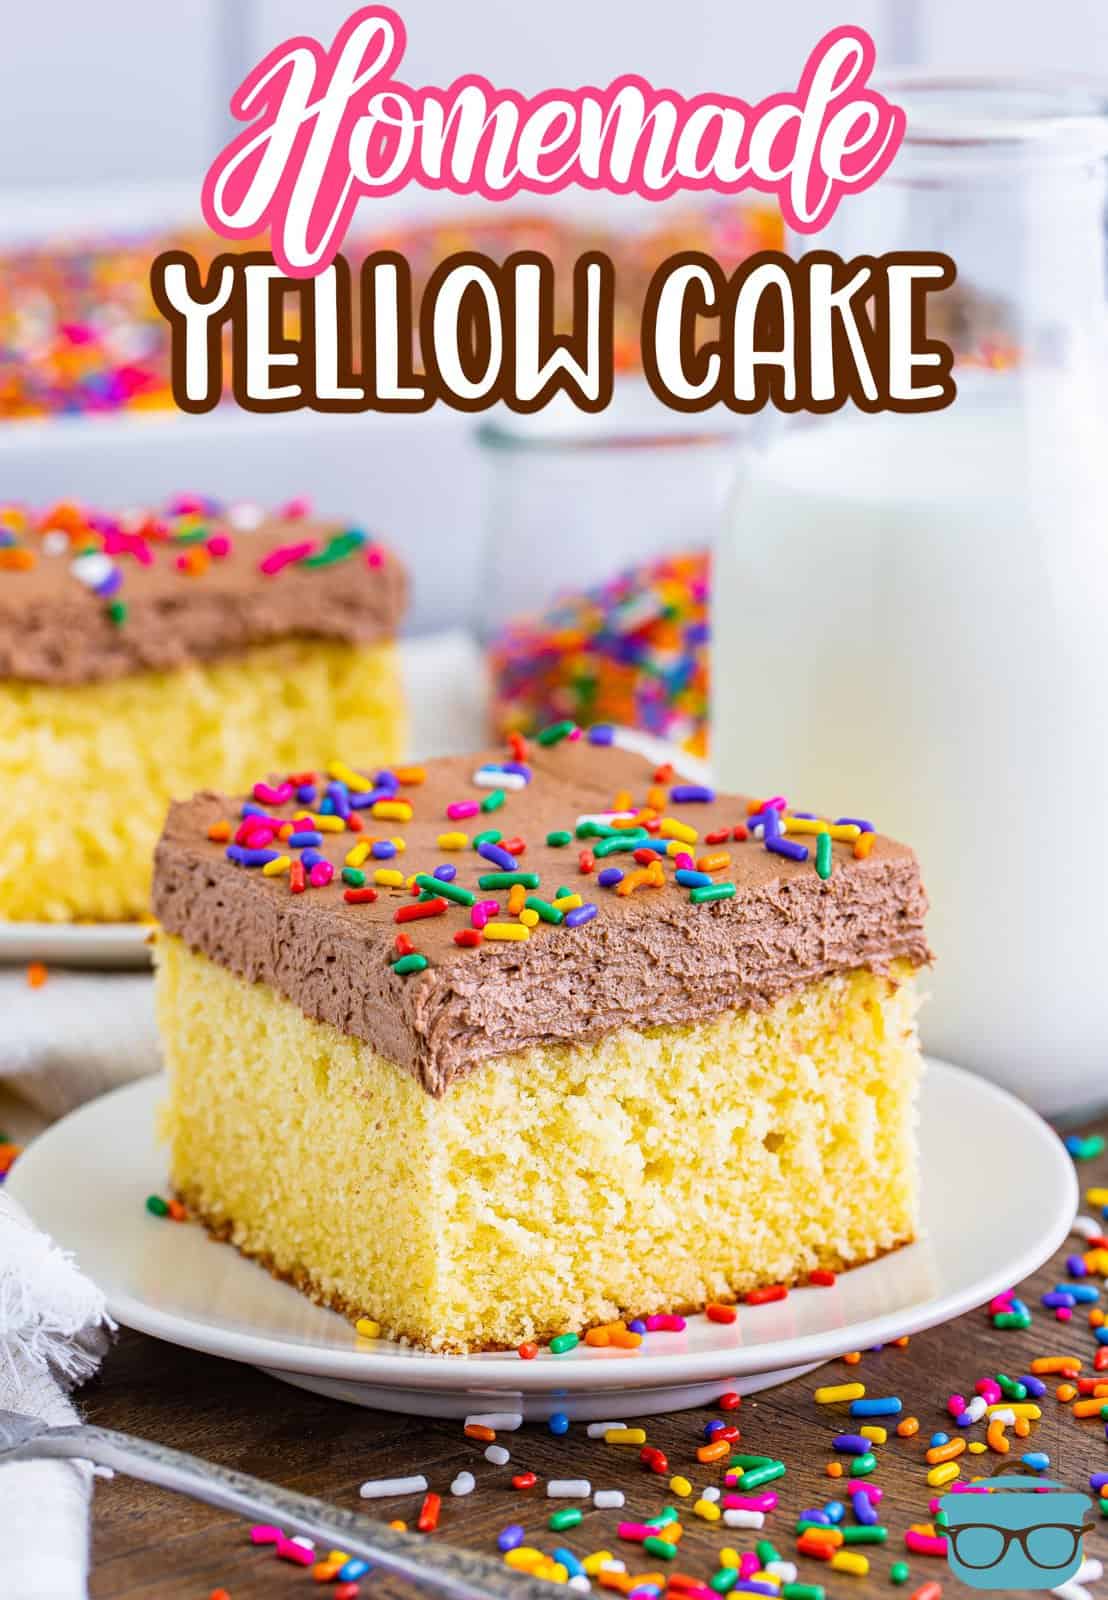 A slice of homemade yellow cake with homemade chocolate frosting.